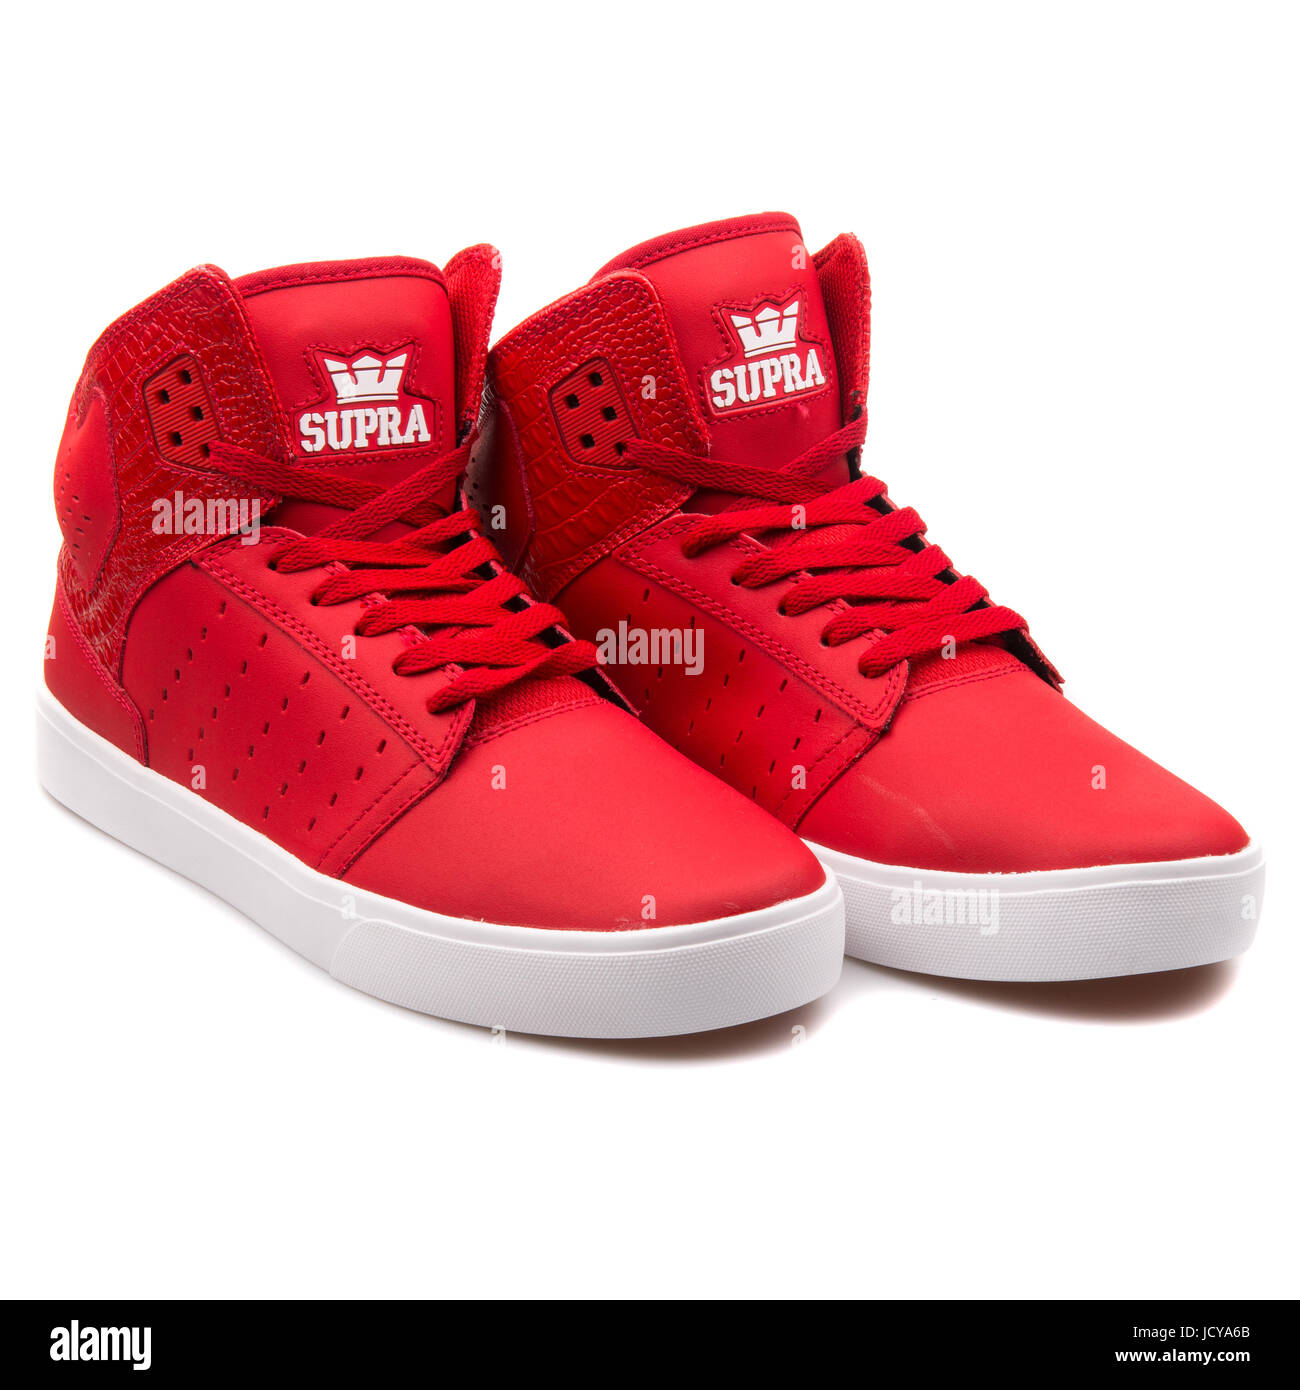 Page 2 - Supra Shoes High Resolution Stock Photography and Images - Alamy